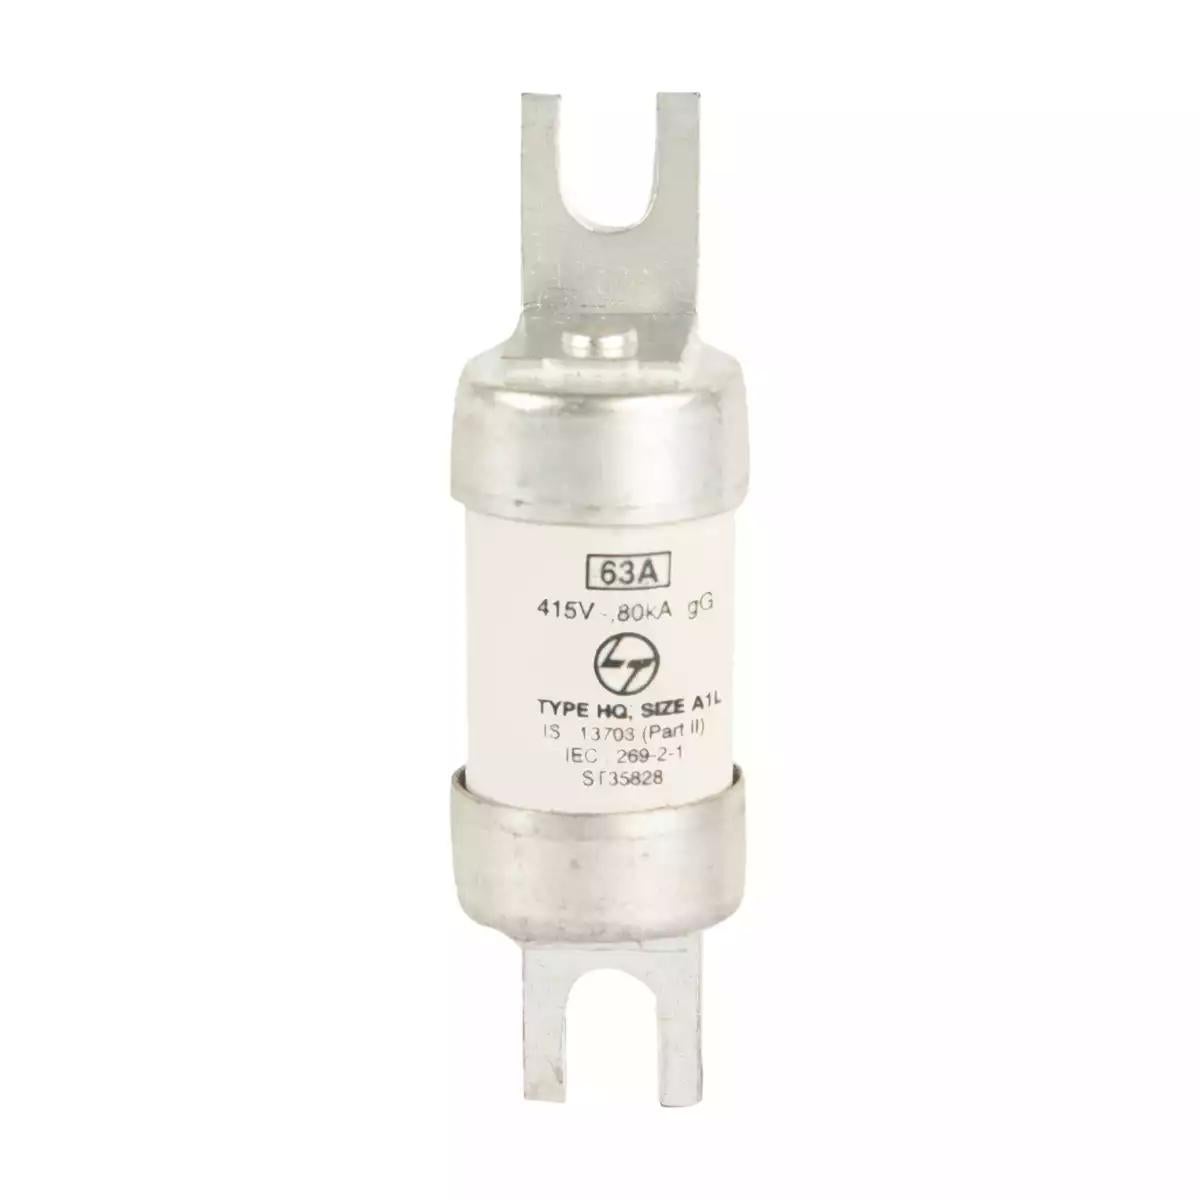 HQ Bolted HRC fuse 50A 415V AC Size A1L